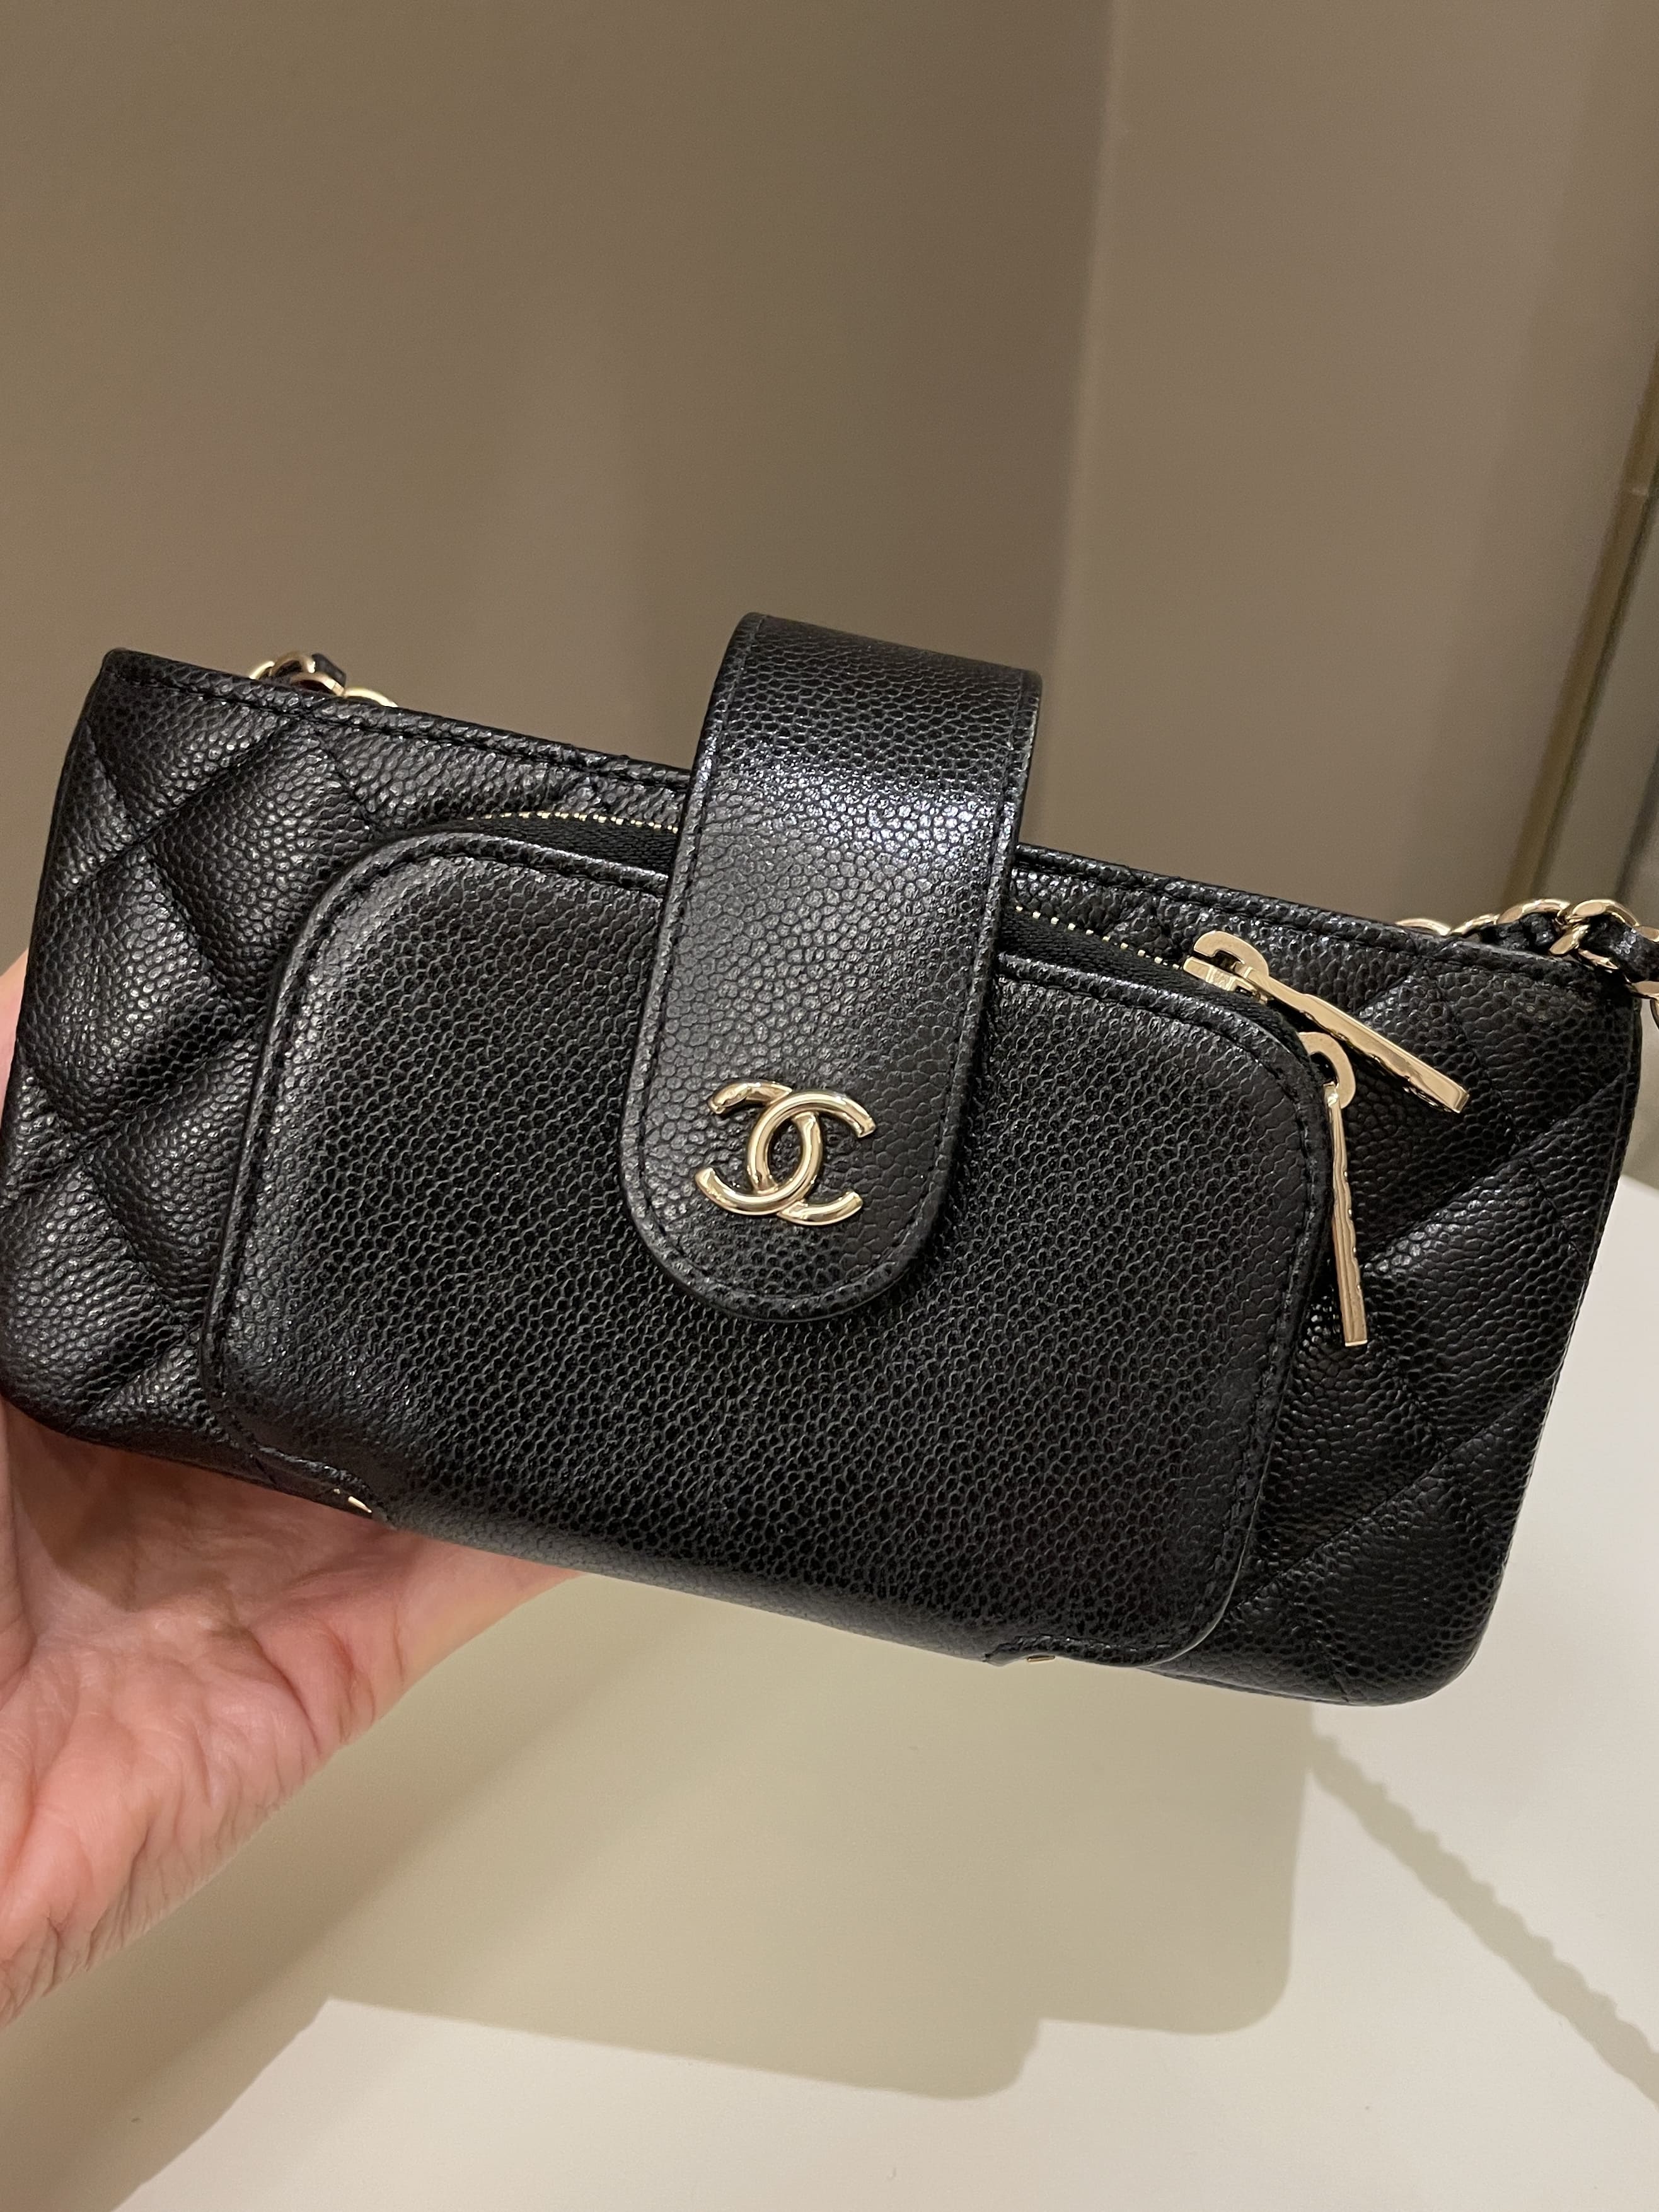 Chanel Black Quilted Leather CC Phone Holder Clutch Chanel